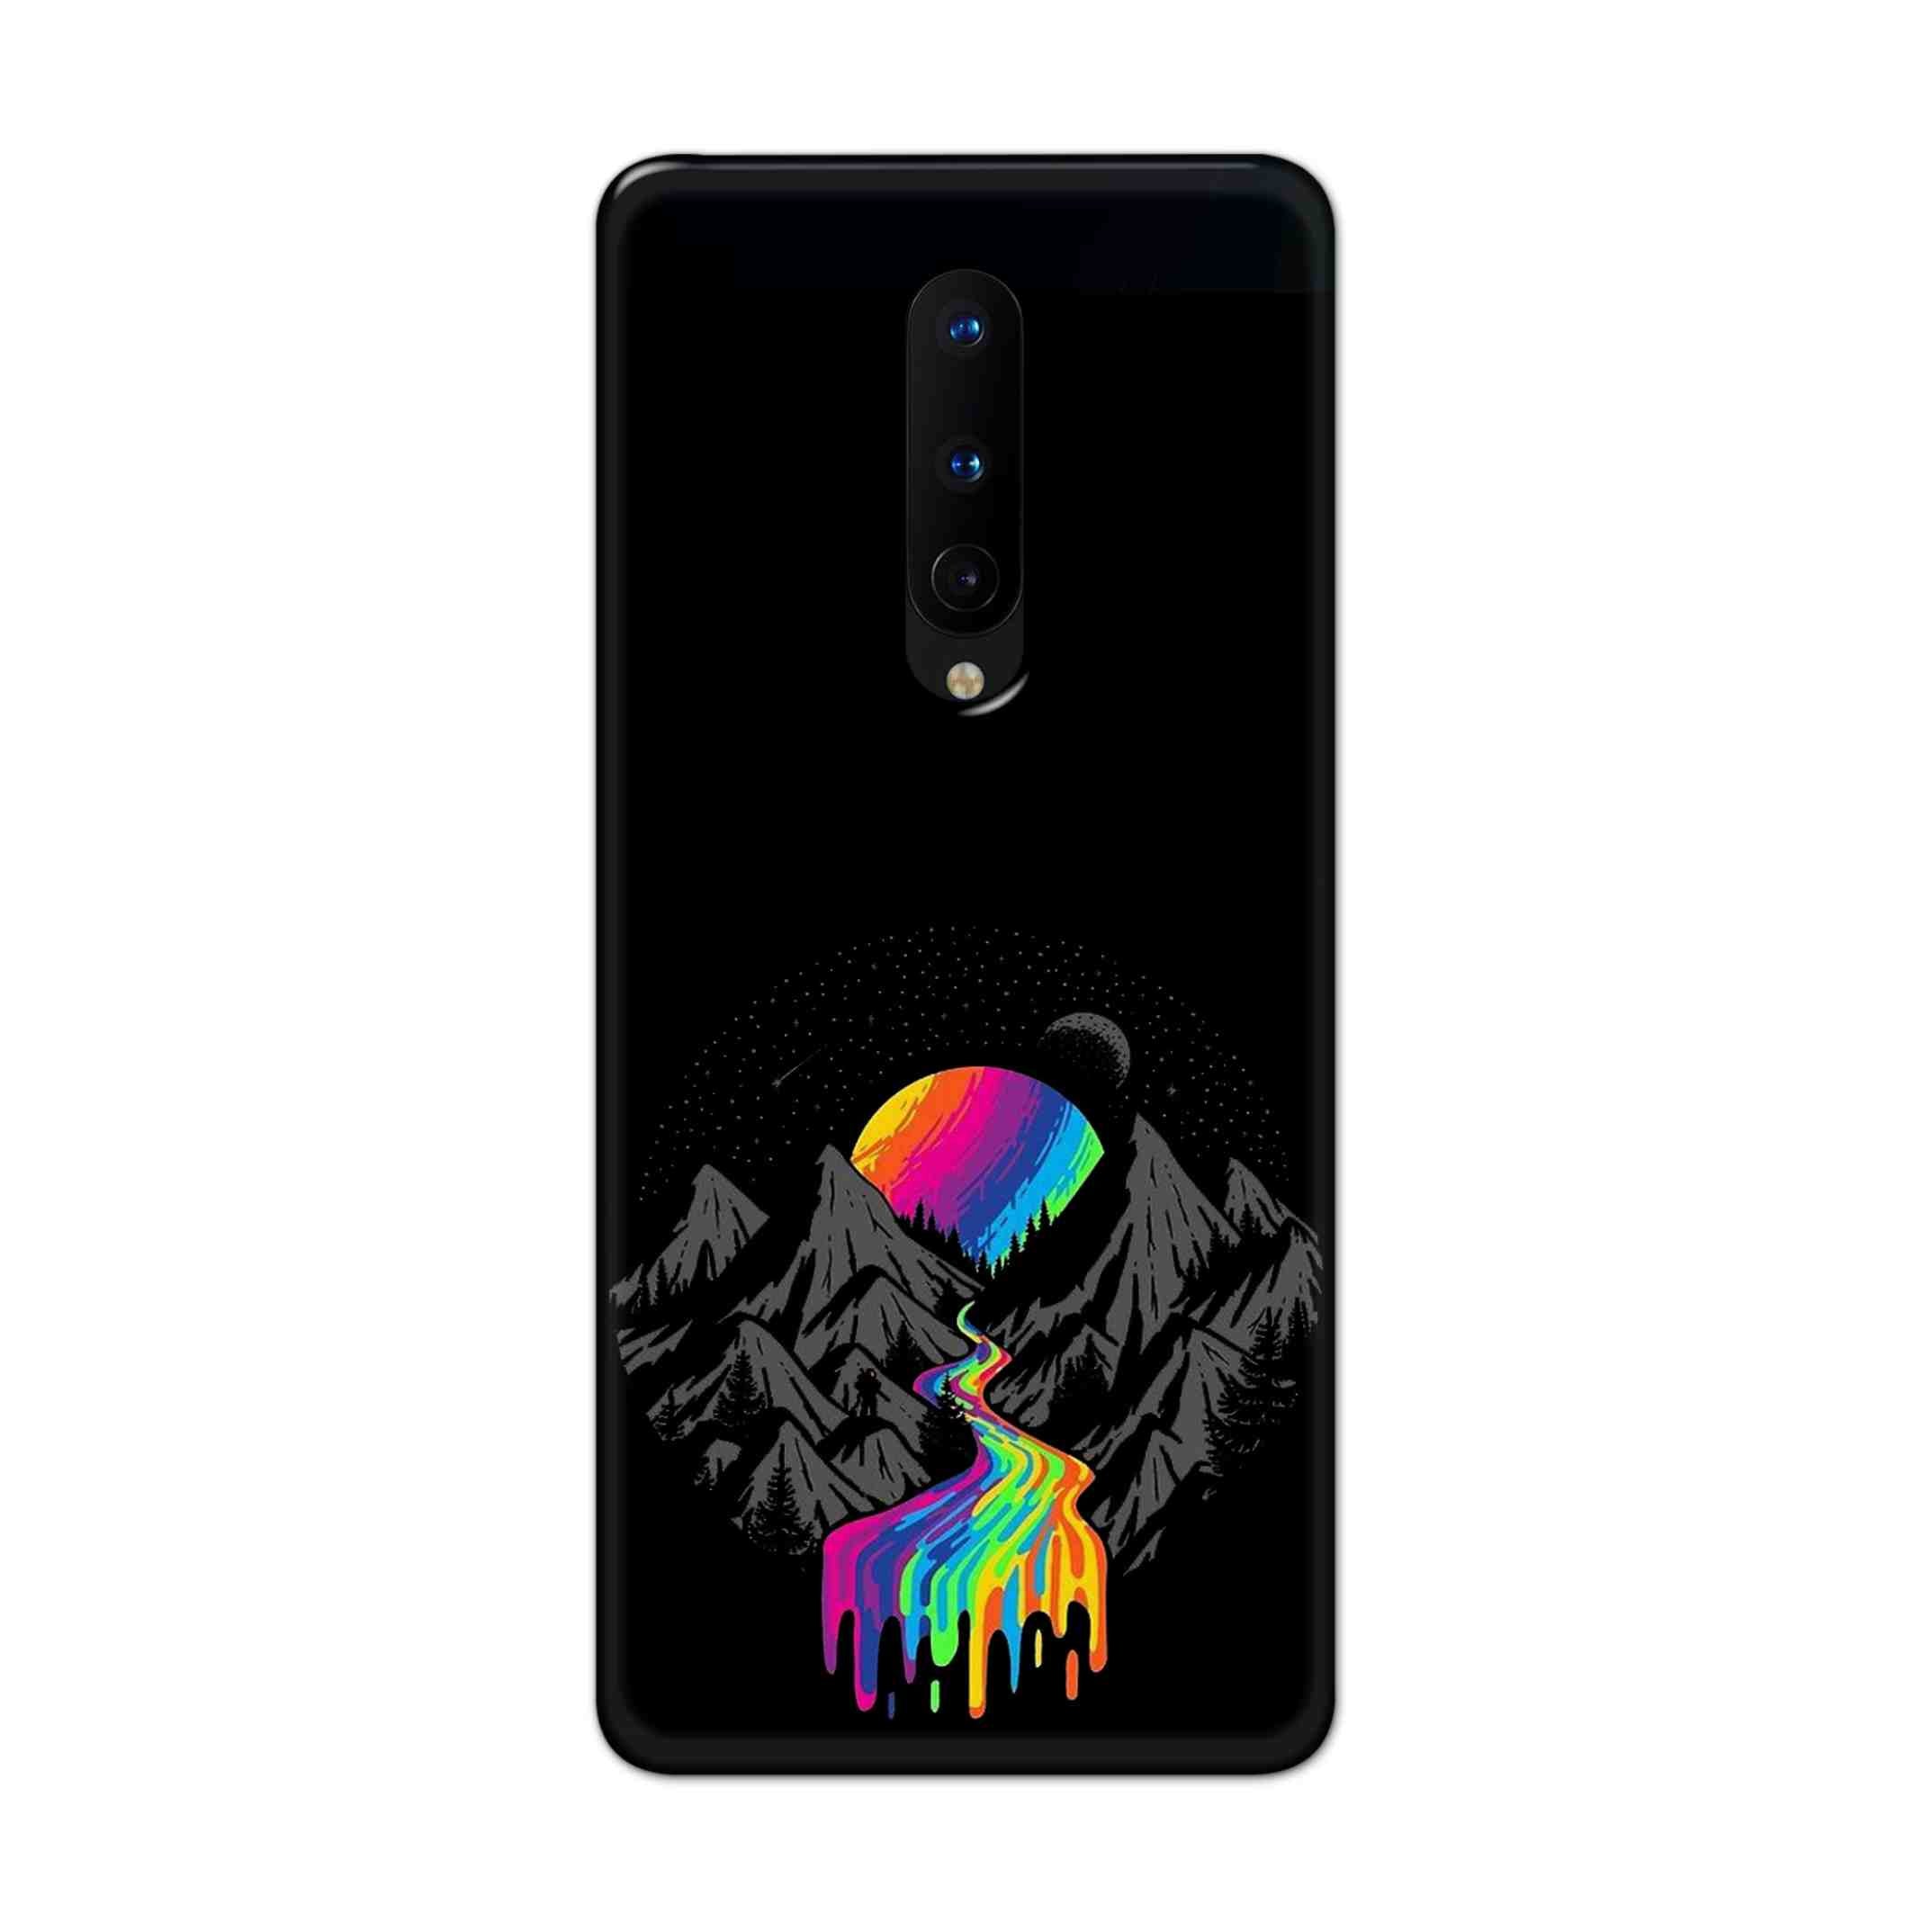 Buy Neon Mount Hard Back Mobile Phone Case Cover For OnePlus 8 Online